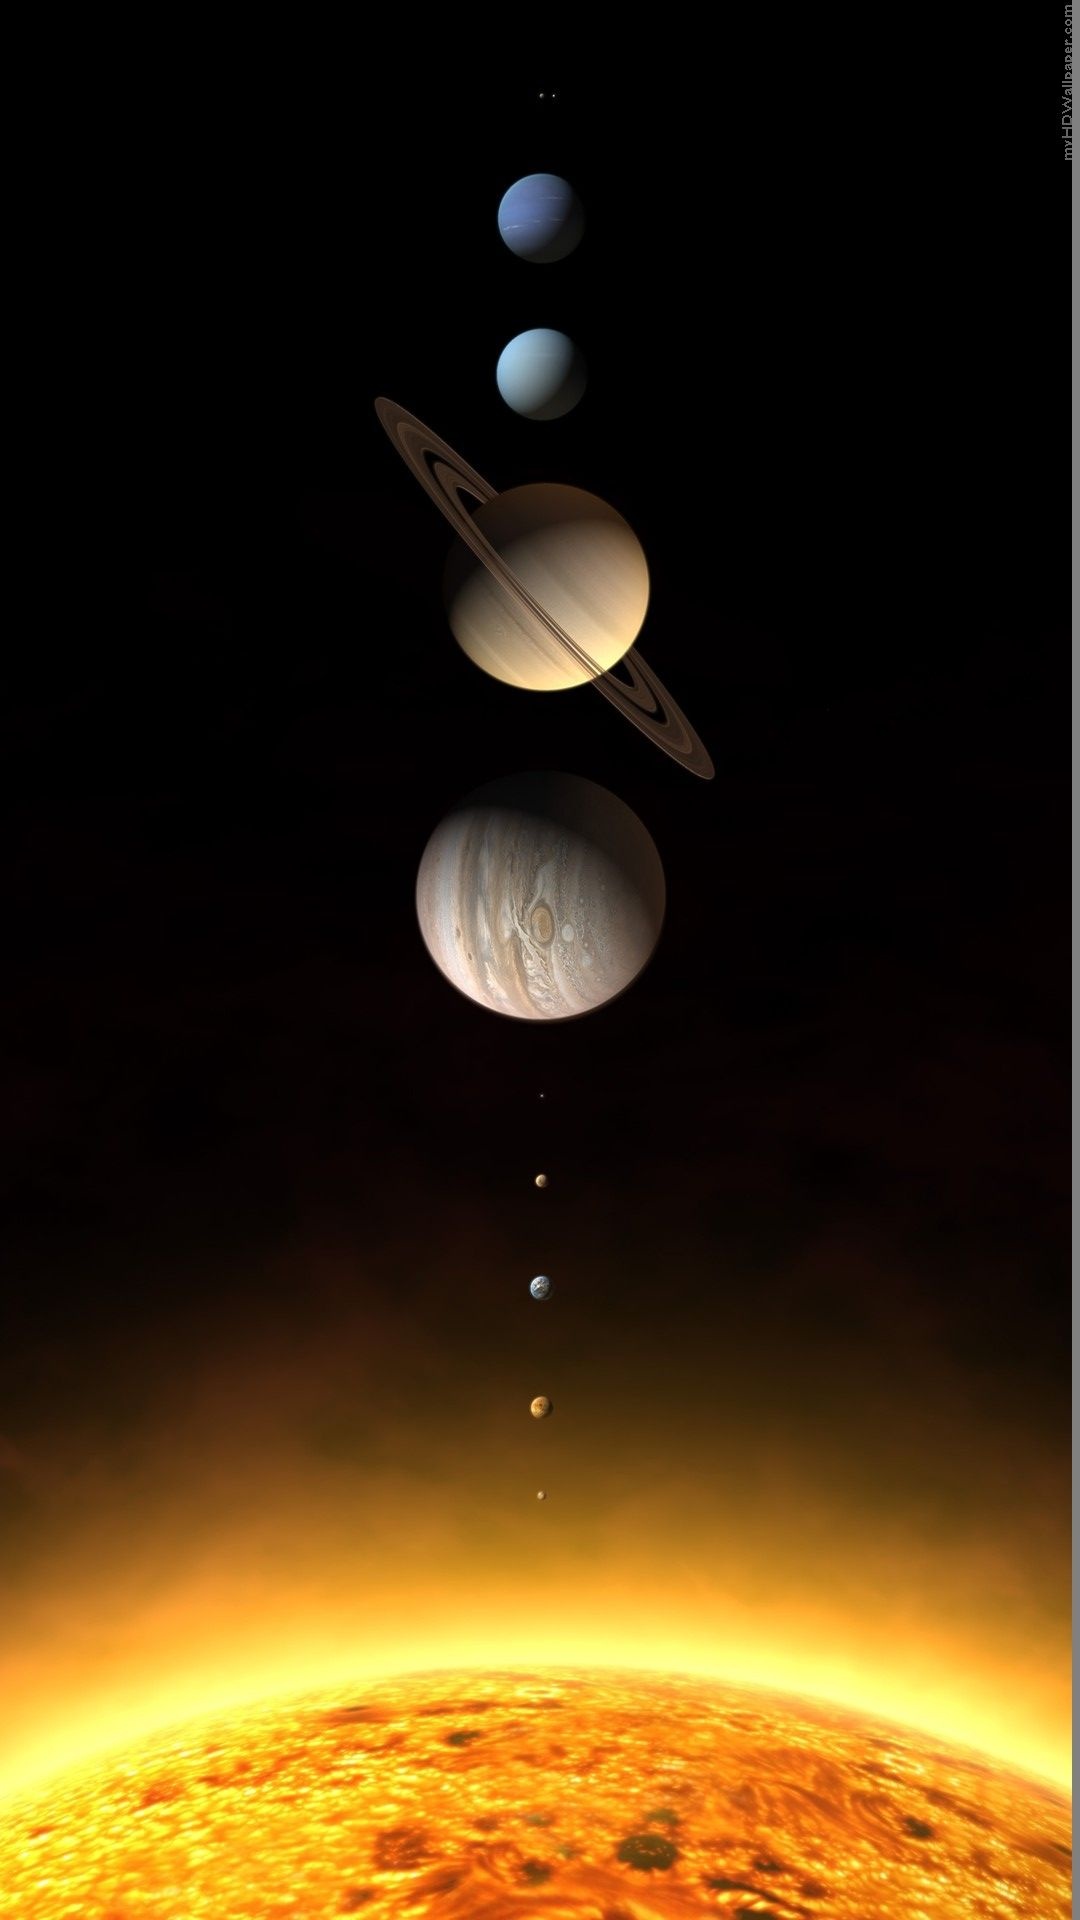 9 Planets, Stunning mobile wallpapers, Personal favorites, Phone perfect, 1080x1920 Full HD Phone